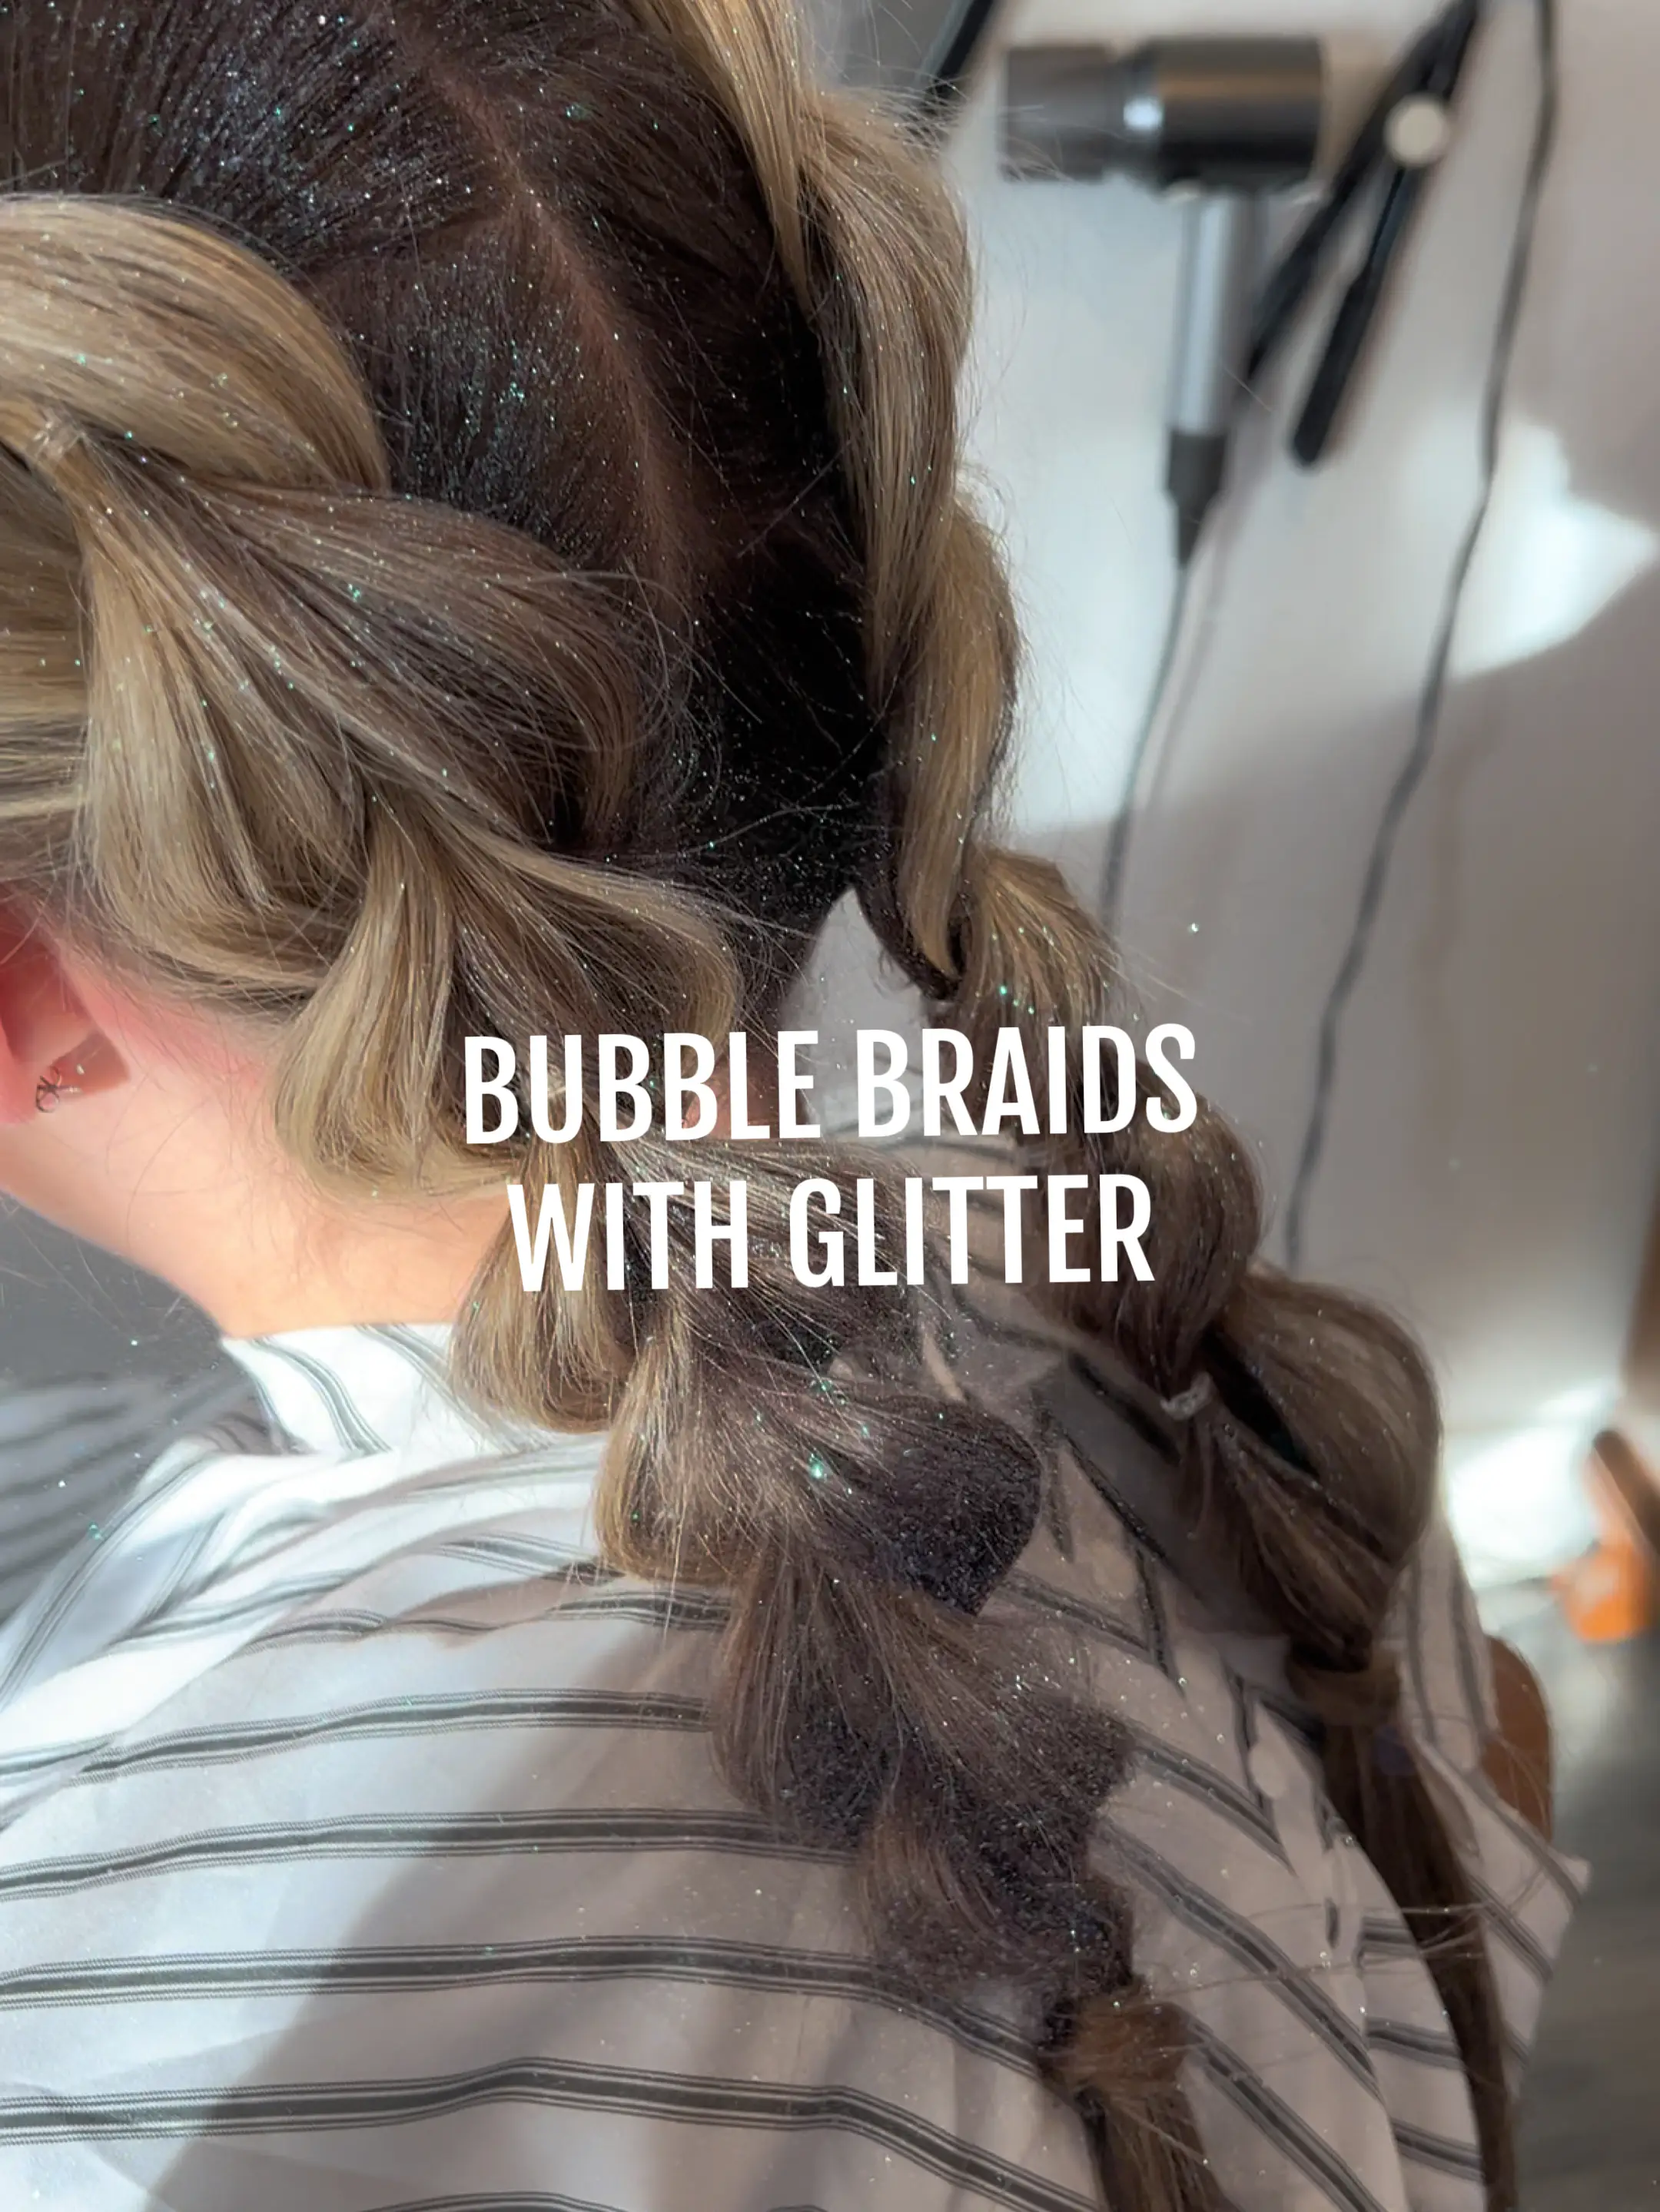 Space buns, braids, and glitter: Salons swarmed with Taylor Swift fans